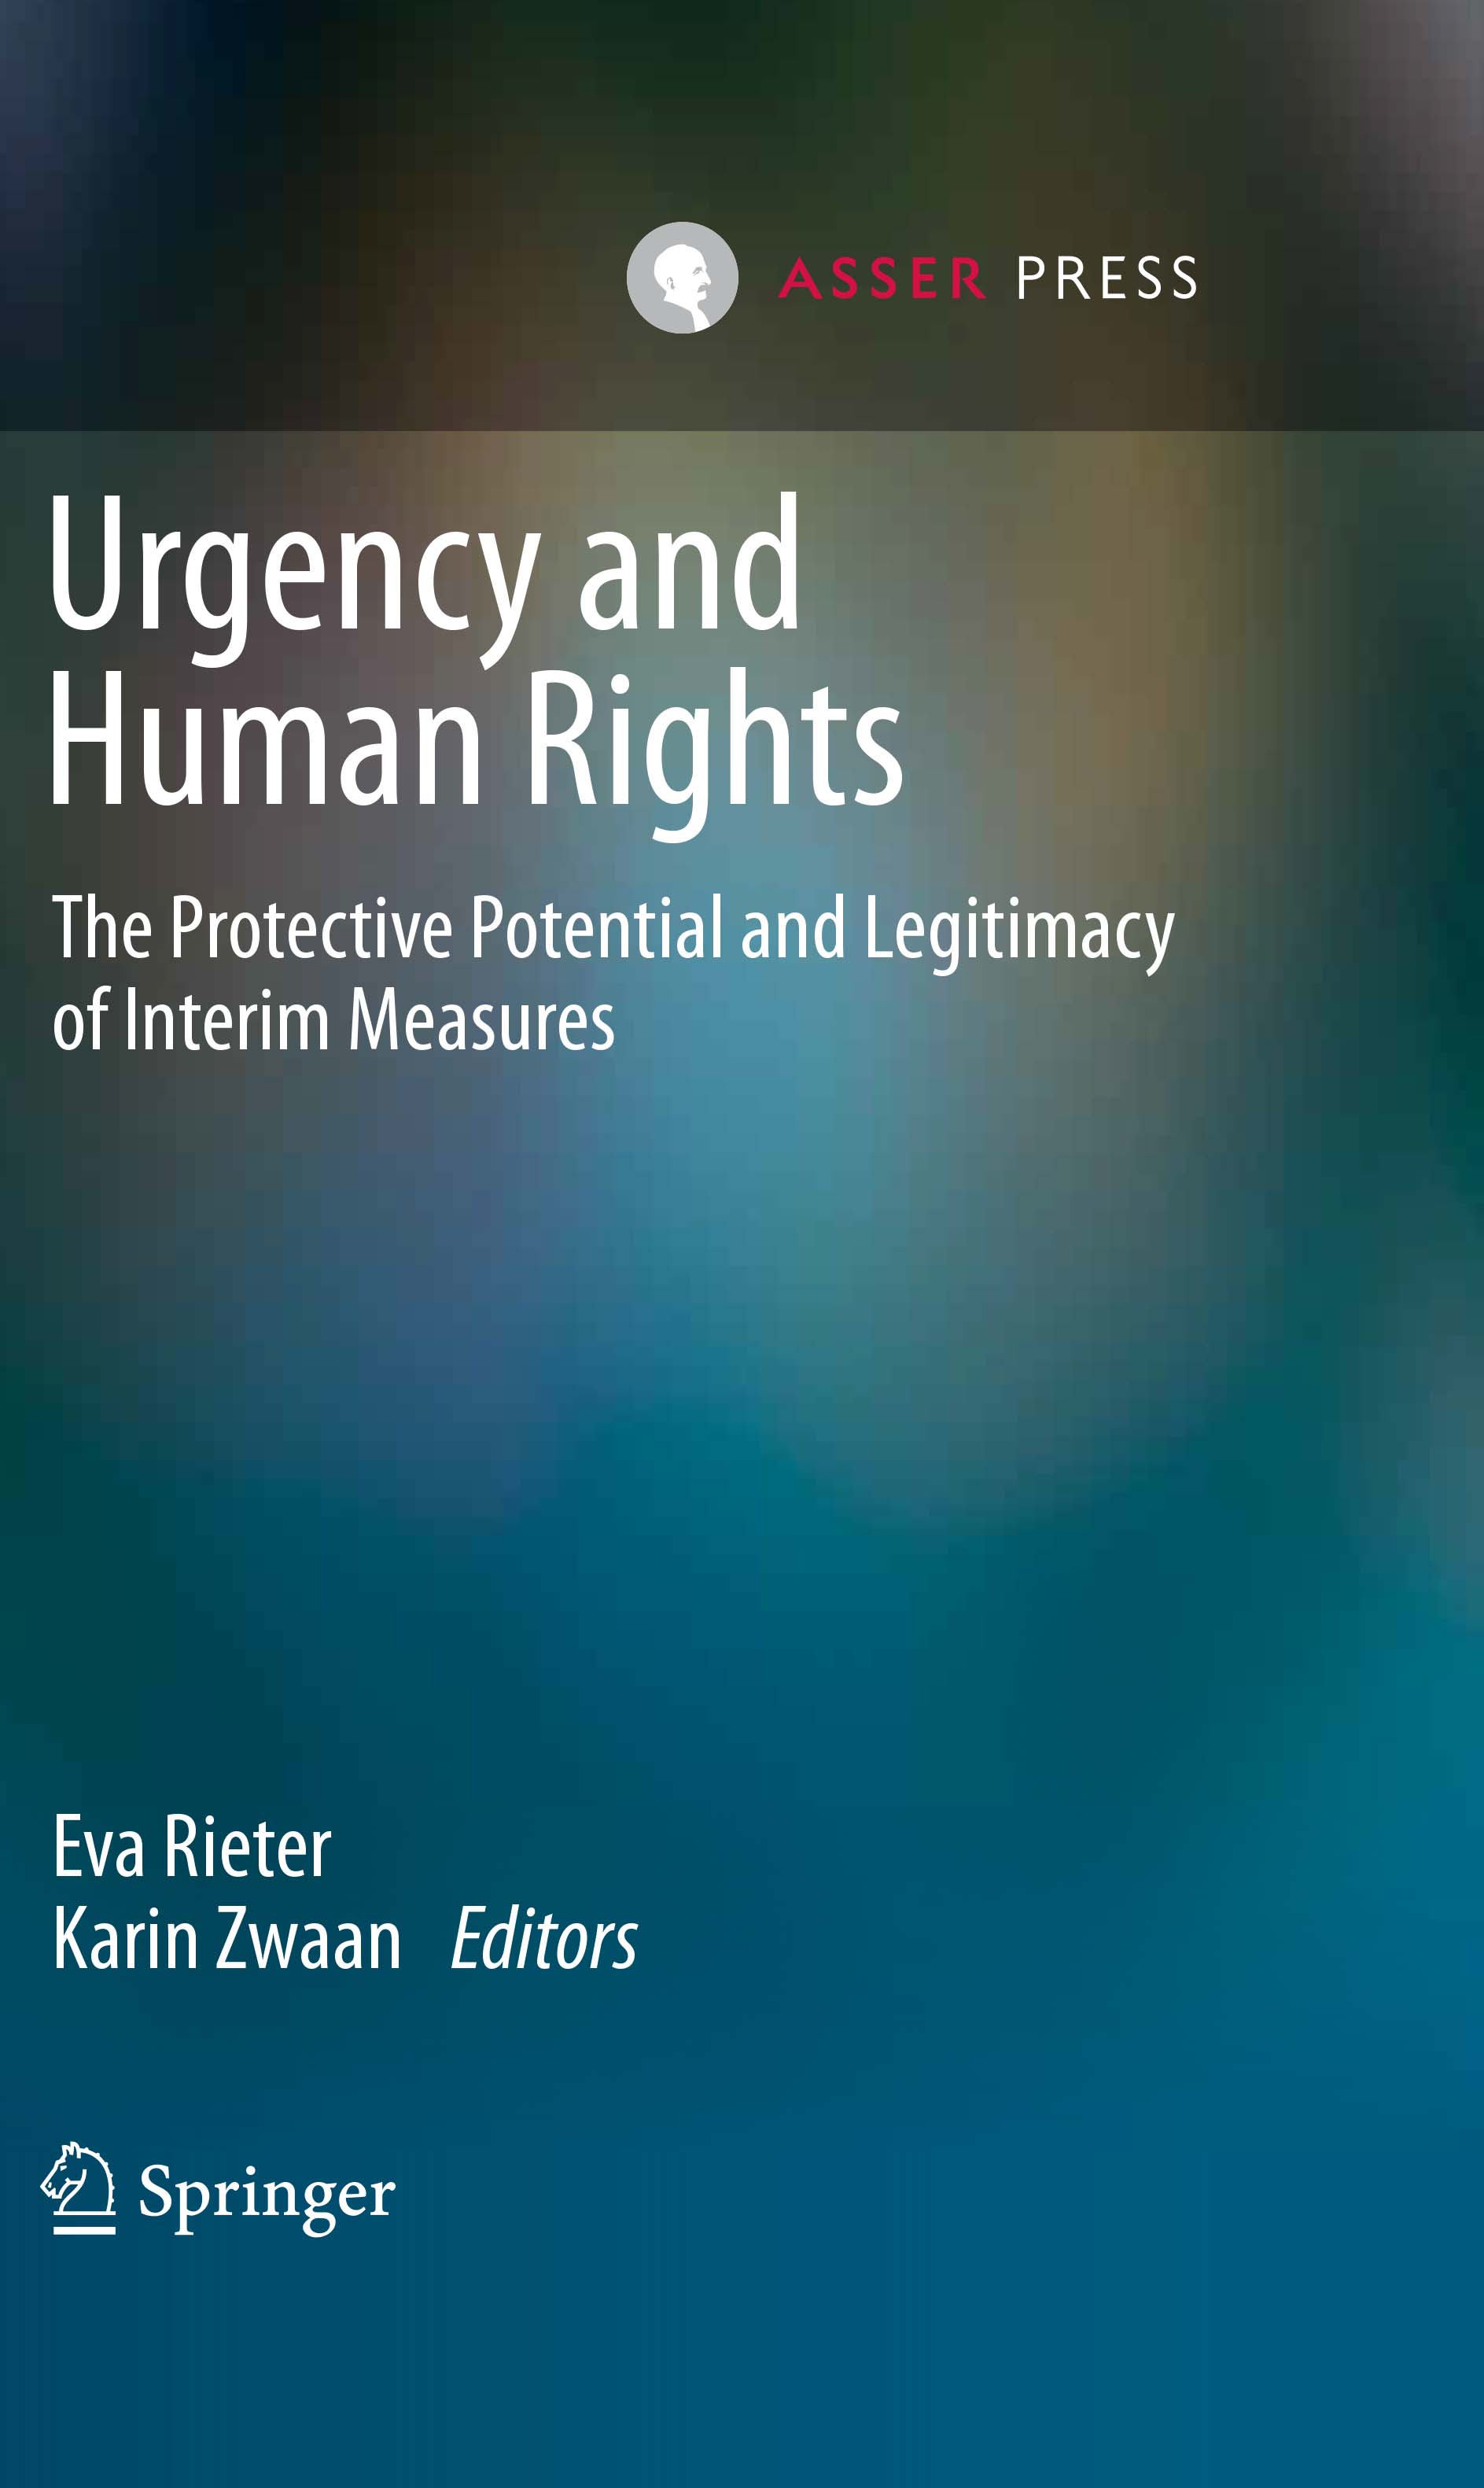 Urgency and Human Rights - The Protective Potential and Legitimacy of Interim Measures